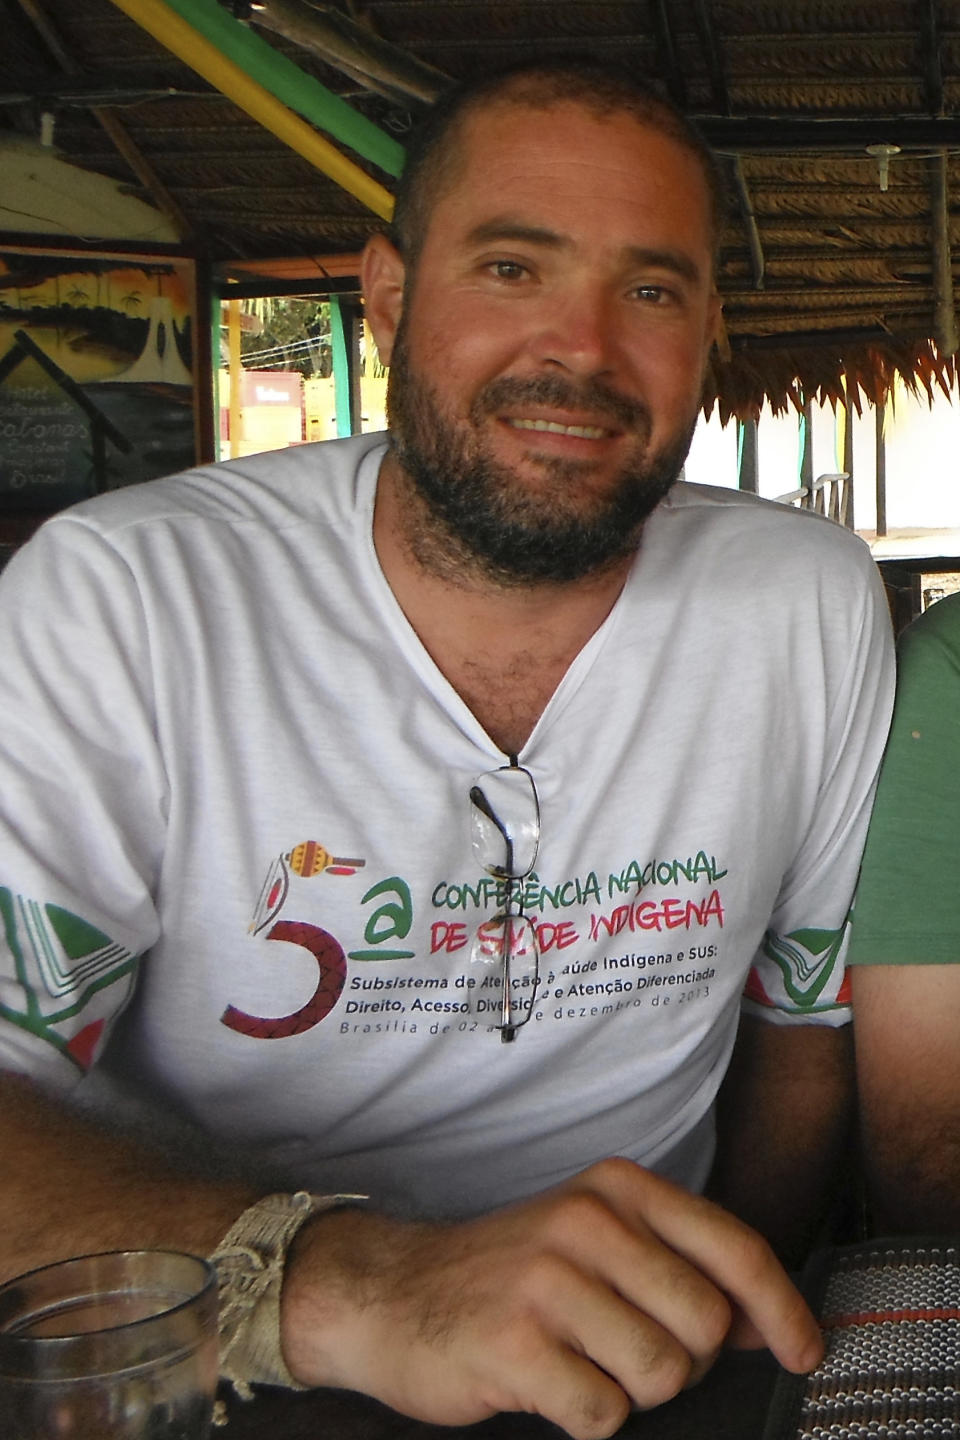 This photo provided by anthropologist Barbara Maisonnave Arisi shows Indigenous affairs expert Bruno Pereira at a restaurant in Benjamin Constant, Amazonas state, Brazil, June 8, 2014. Pereira was killed along with British freelance reporter Dom Phillips after they disappeared together in Brazil’s remote Amazon region on June 5, 2022. (Barbara Maisonnave Arisi via AP)